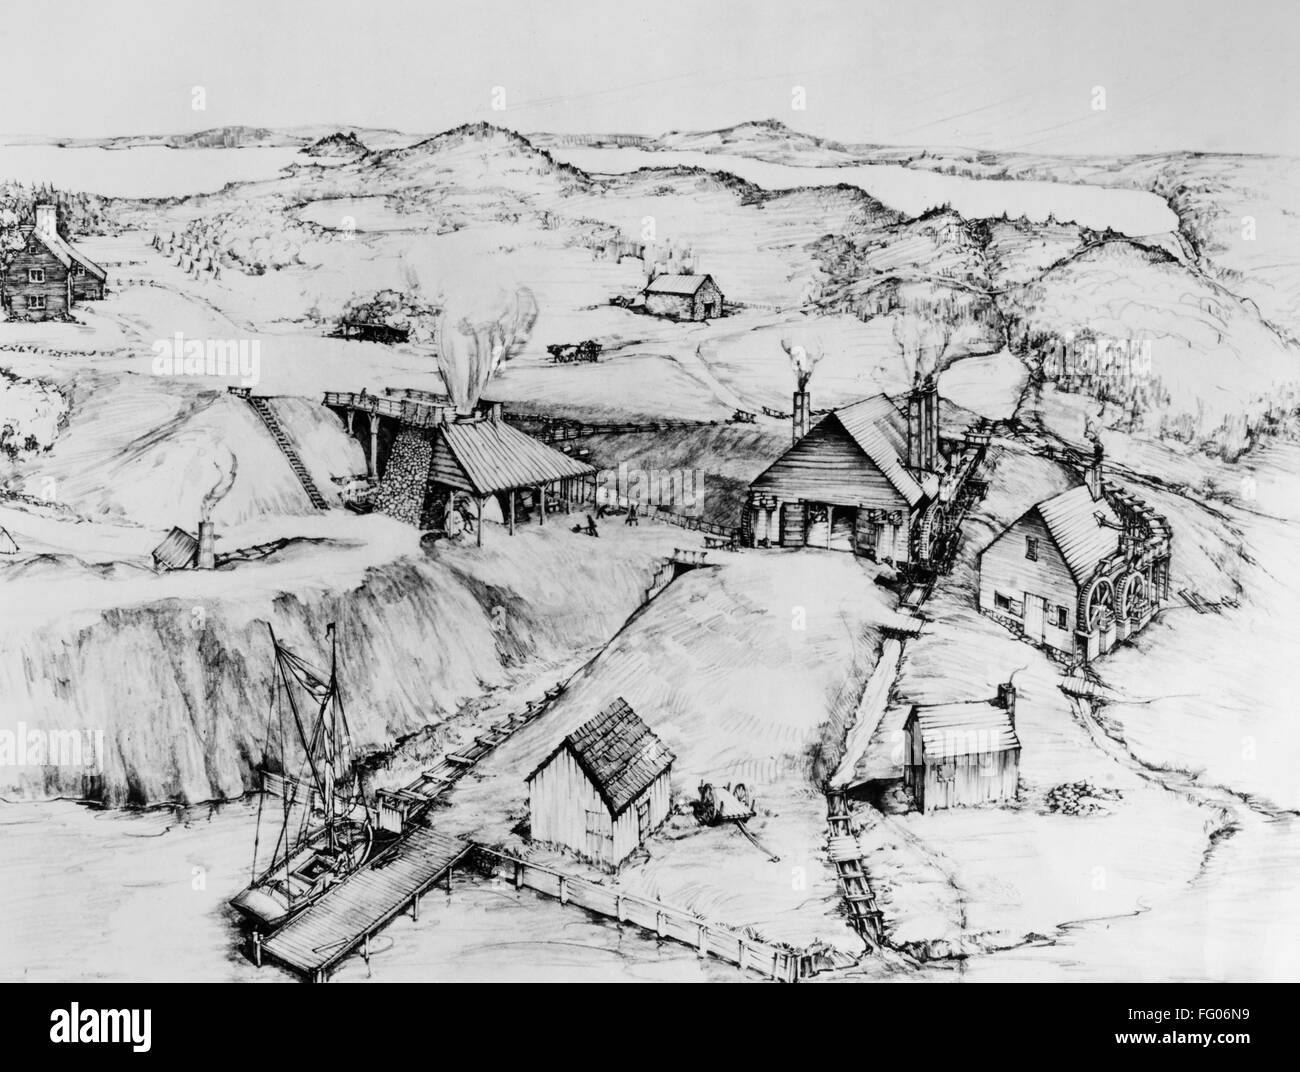 COLONIAL IRON WORKS. /nA 20th-century artist's reconstruction of the Saugus Iron Works in Saugus, Massachusetts, in operation from 1664 to 1668, the first integrated iron works in North America. Stock Photo